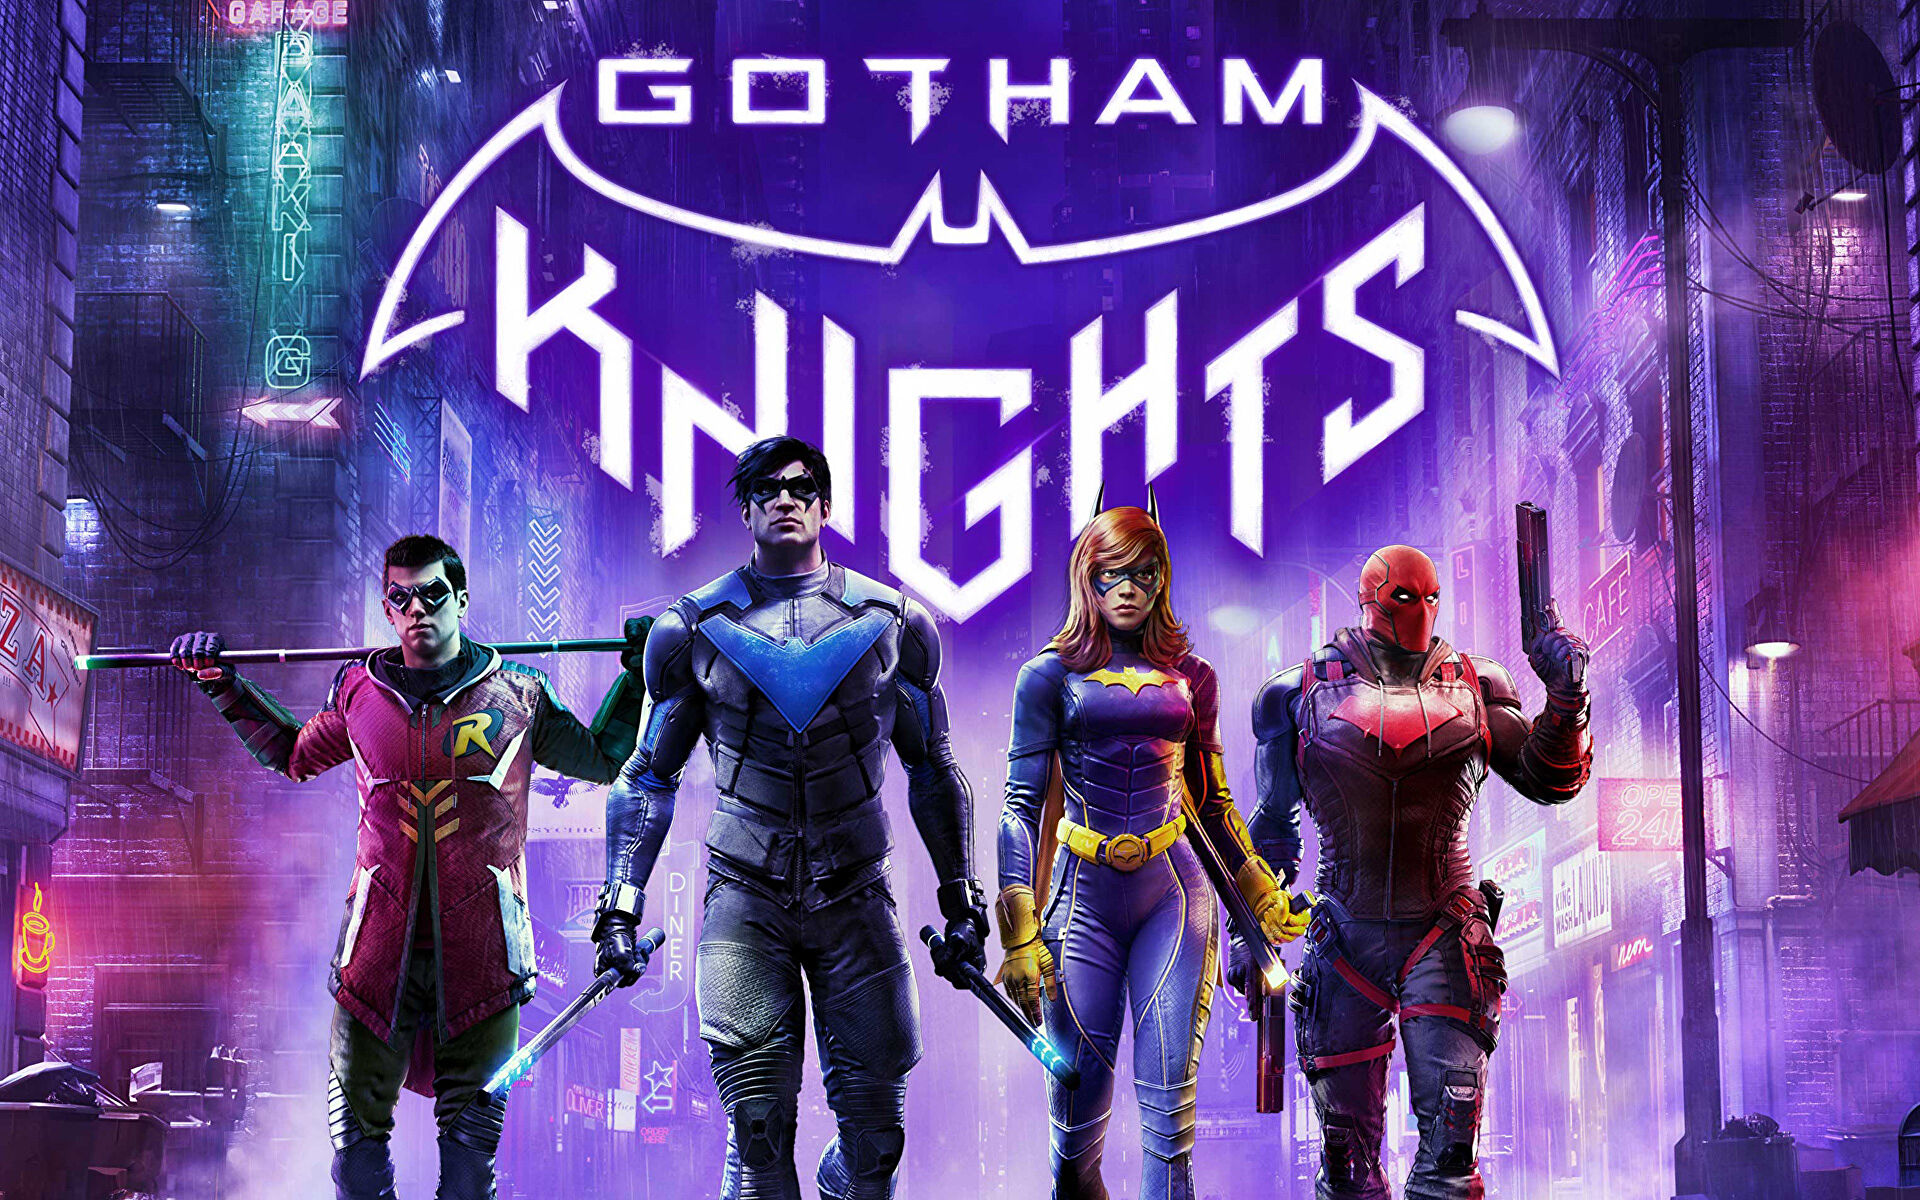 Gotham Knights Review (PS5) - Knight of the Living Dead - Finger Guns